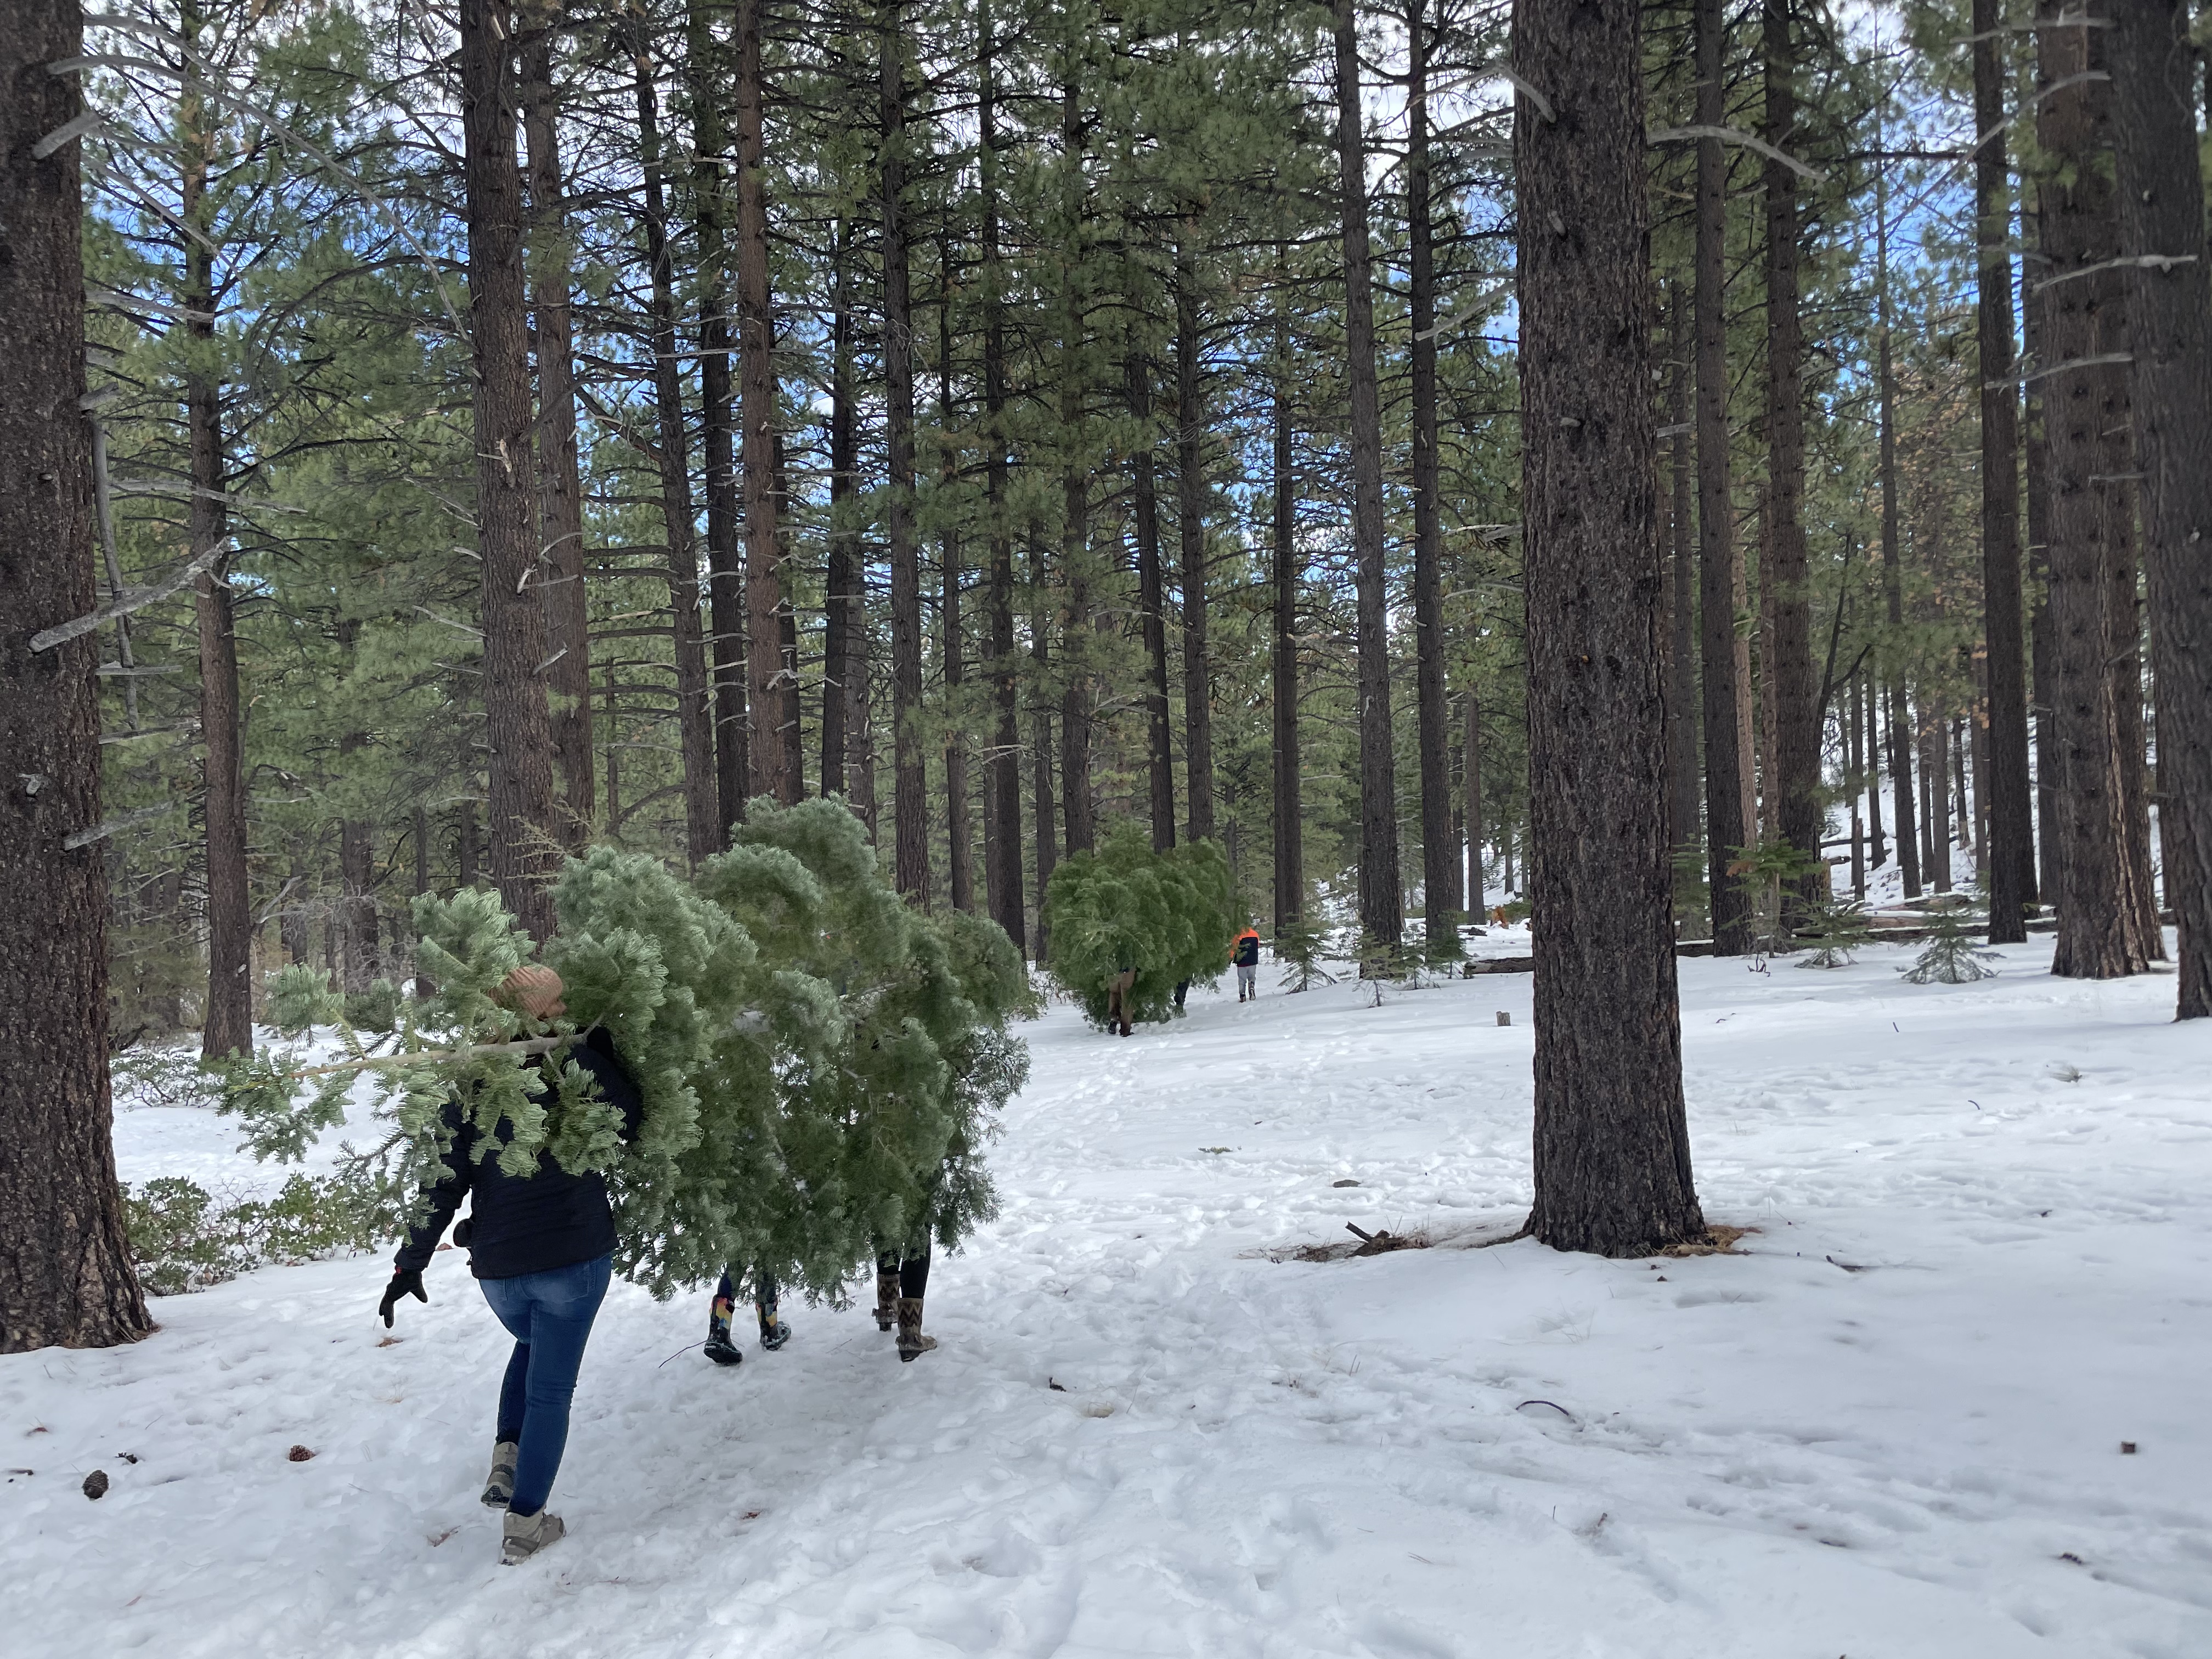 Hiking out Christmas trees in the forrest